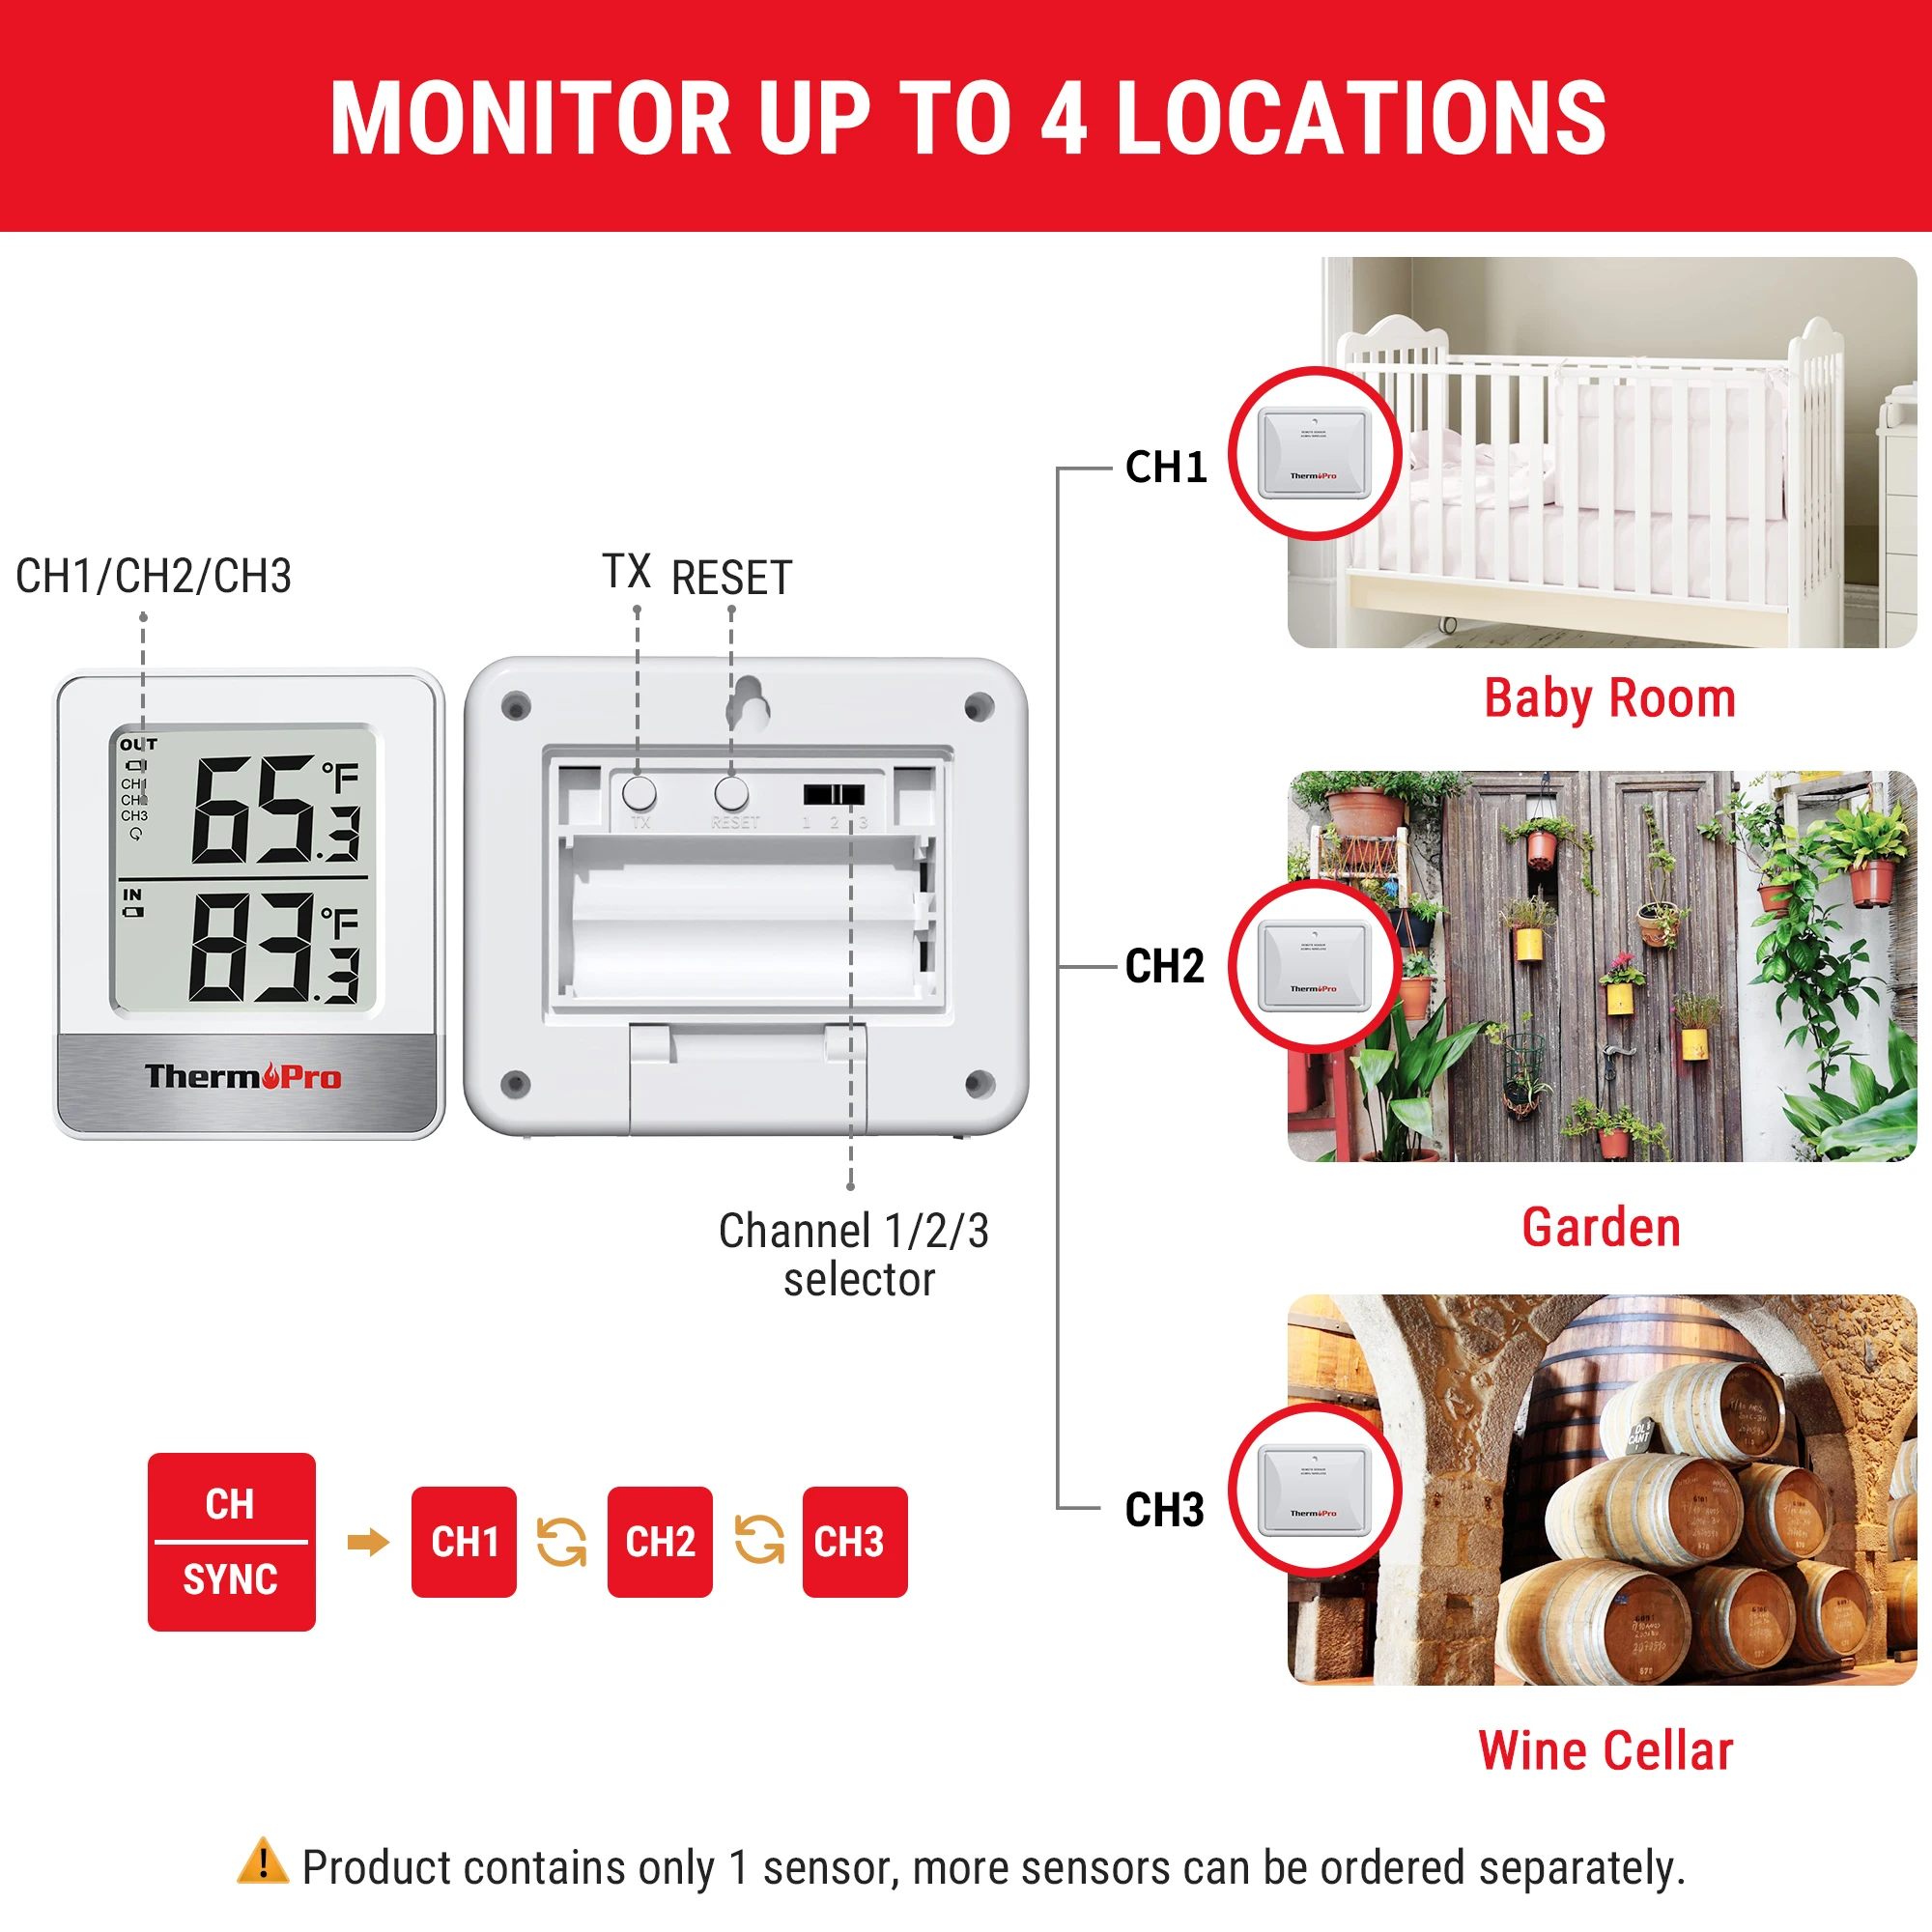 ThermoPro TP200B 150M Wireless Remote Range Weather Station Indoor